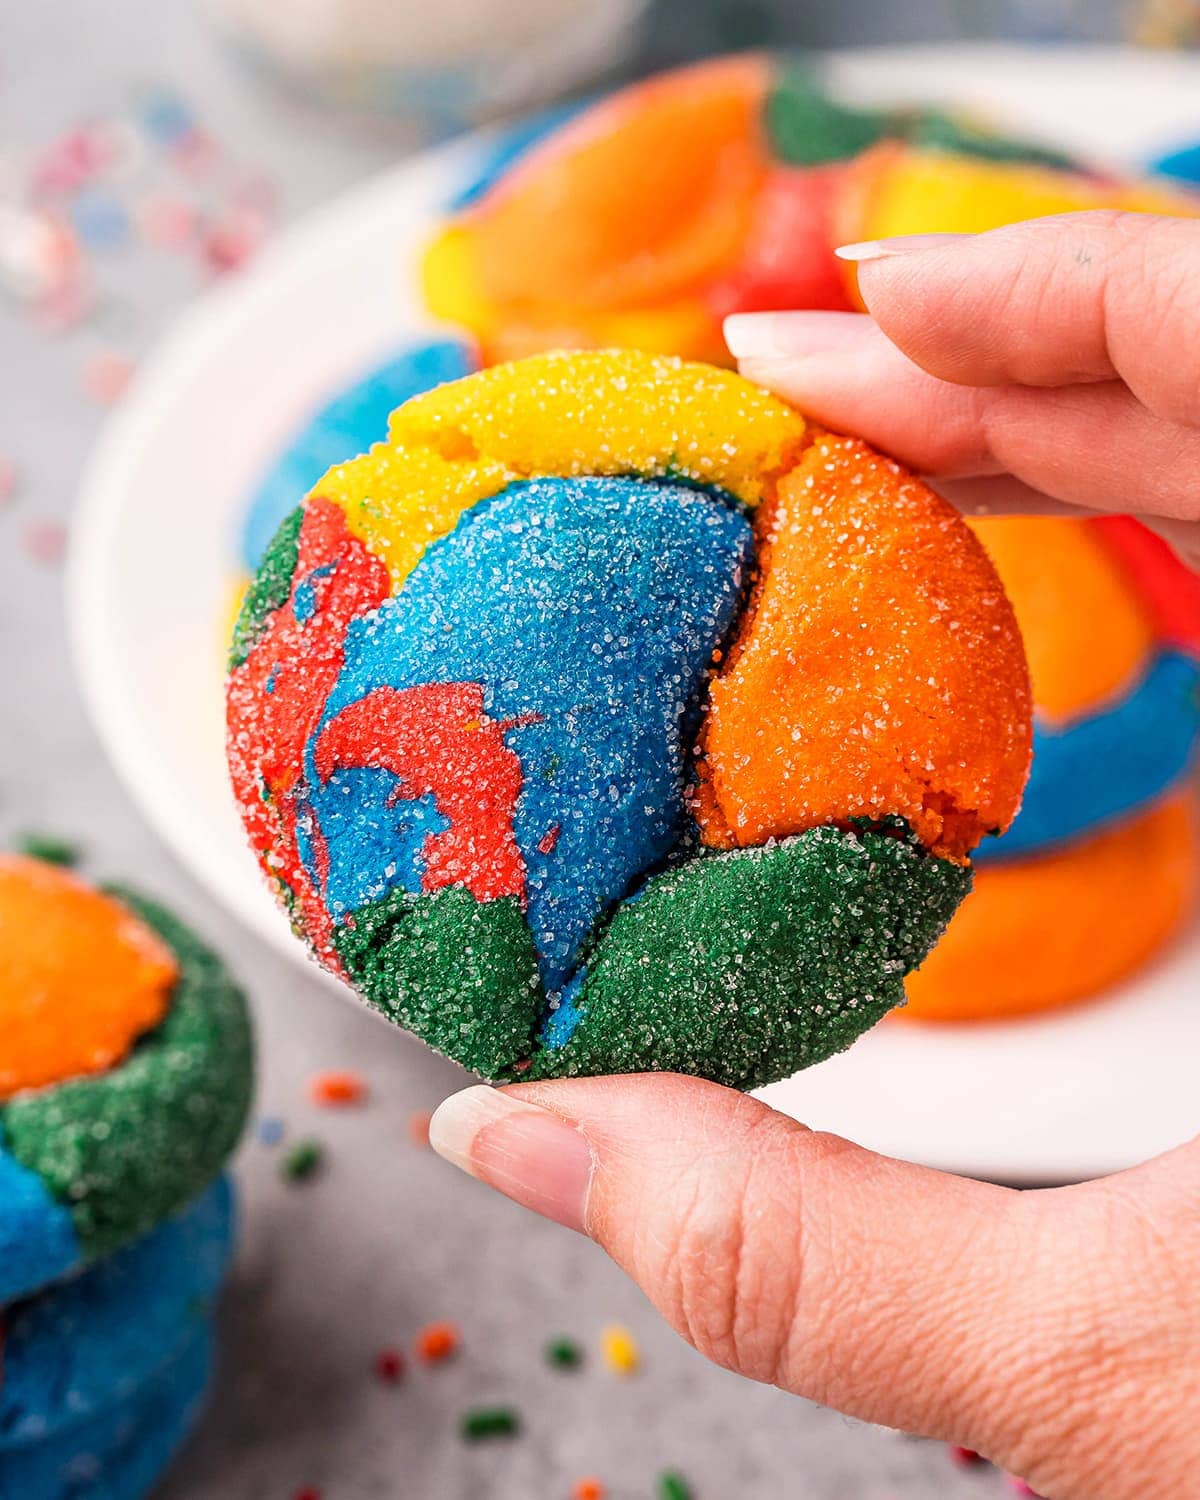 A hand holding a rainbow swirled cookie, with red, yellow, orange, blue and green colors.